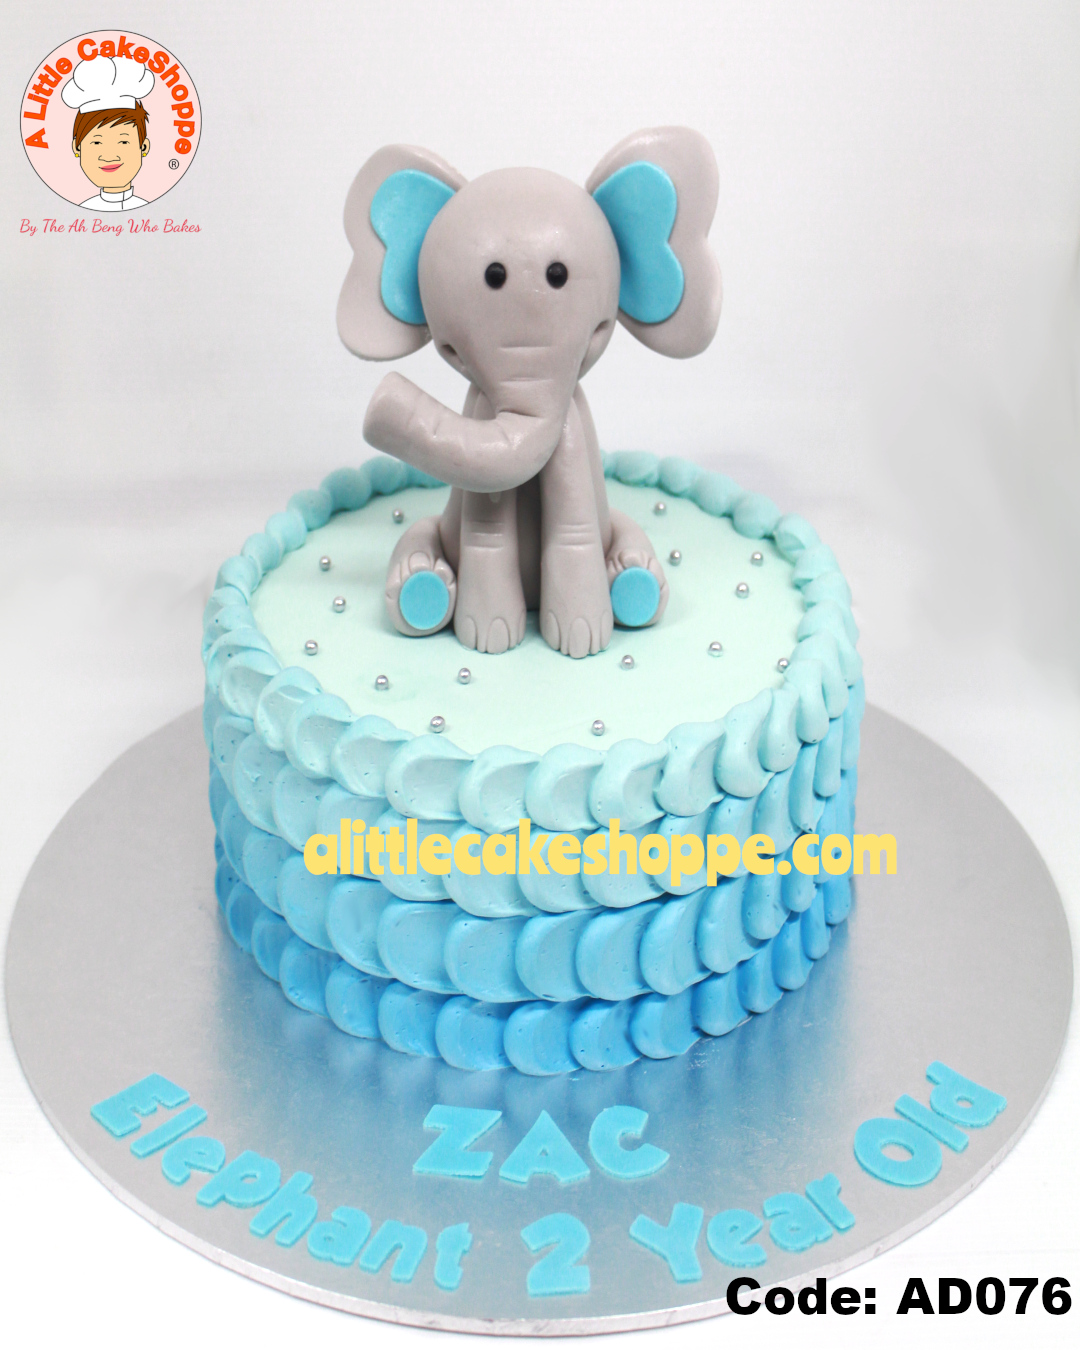 Best Cake Shop Singapore Delivery Best Customised Cake Shop Singapore customise cake custom cake 2D 3D birthday cake cupcakes desserts wedding corporate events anniversary 1st birthday 21st birthday fondant fresh cream buttercream cakes alittlecakeshoppe a little cake shoppe compliments review singapore bakers SG cake shop cakeshop ah beng who bakes sgbakes novelty cakes sgcakes licensed sfa nea cake delivery celebration cakes kids birthday cake surprise cake adult children animal safari elephant